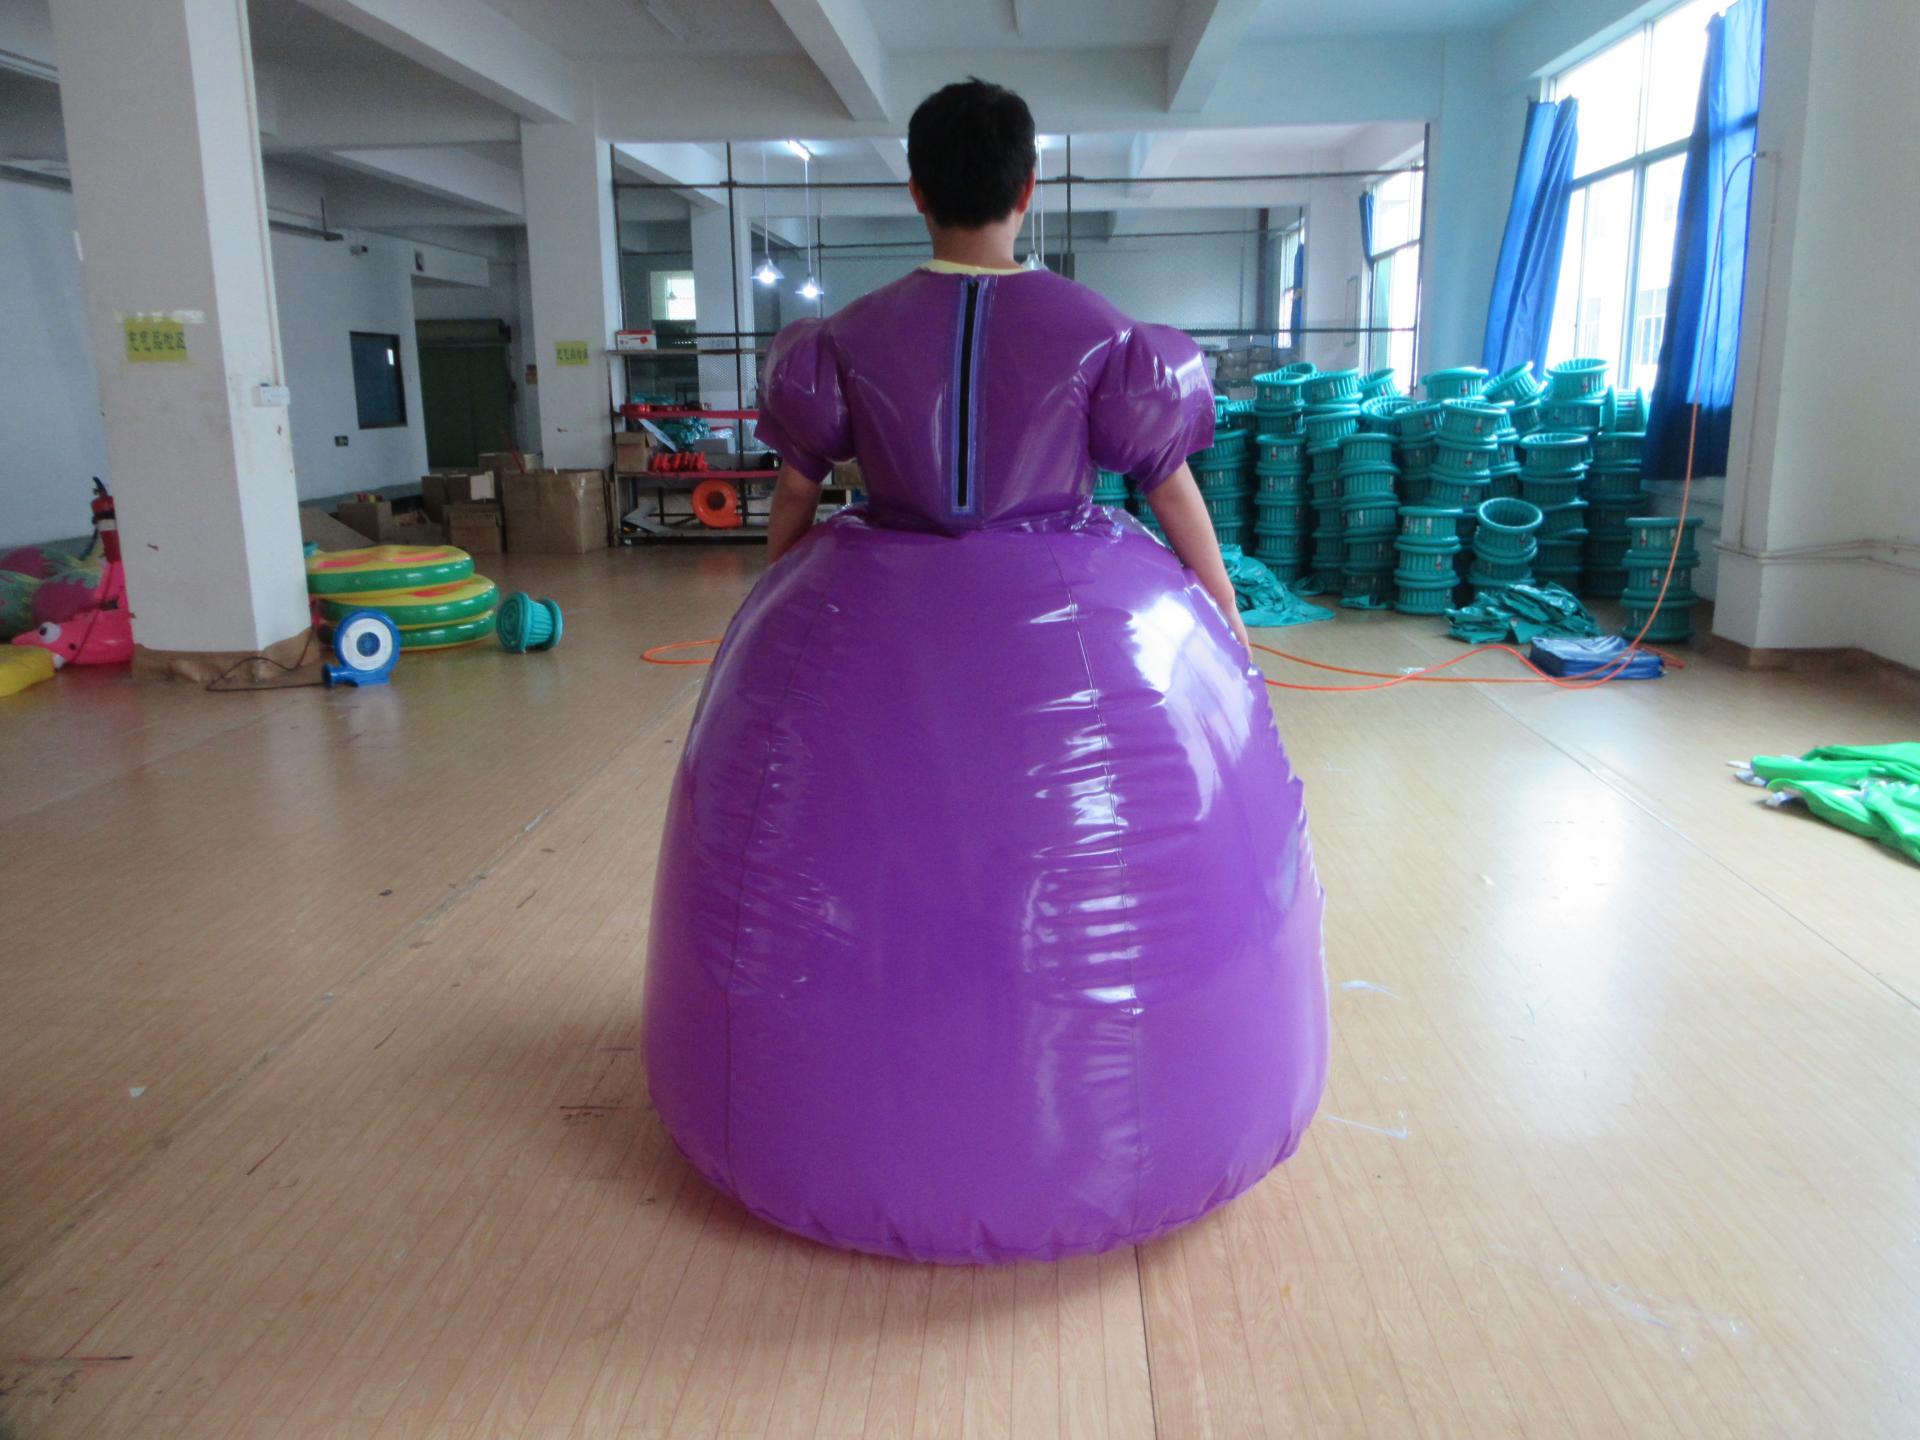 Customised Inflatable Dress Replica Surprise Costume Air Blow Up Jaws Jumpsuit Fun Fancy Dress